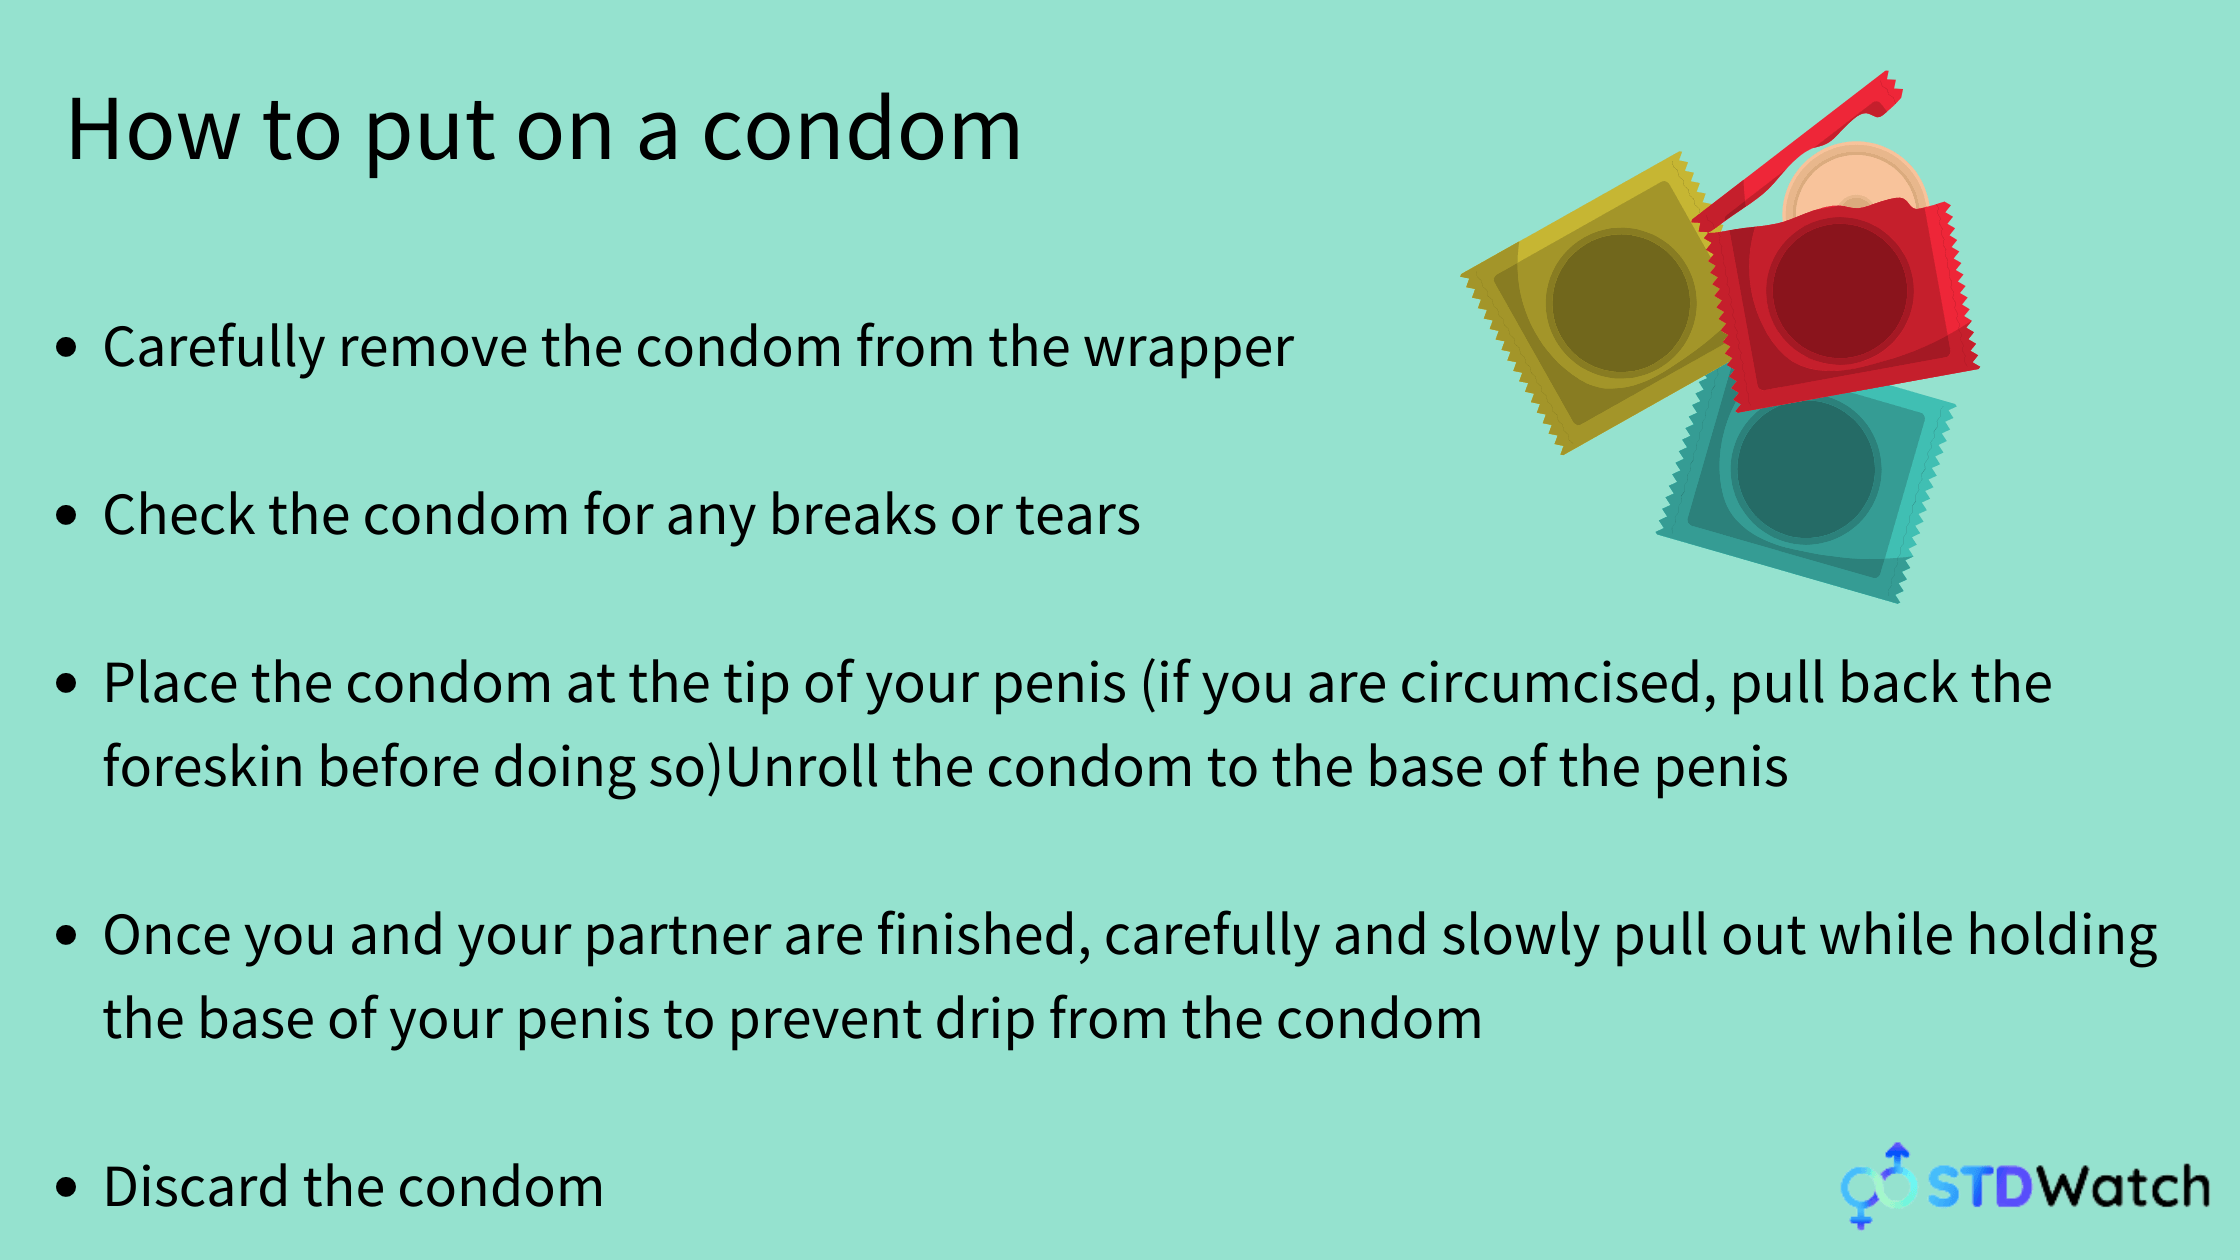 how-to-put-on-a-condom-infographic